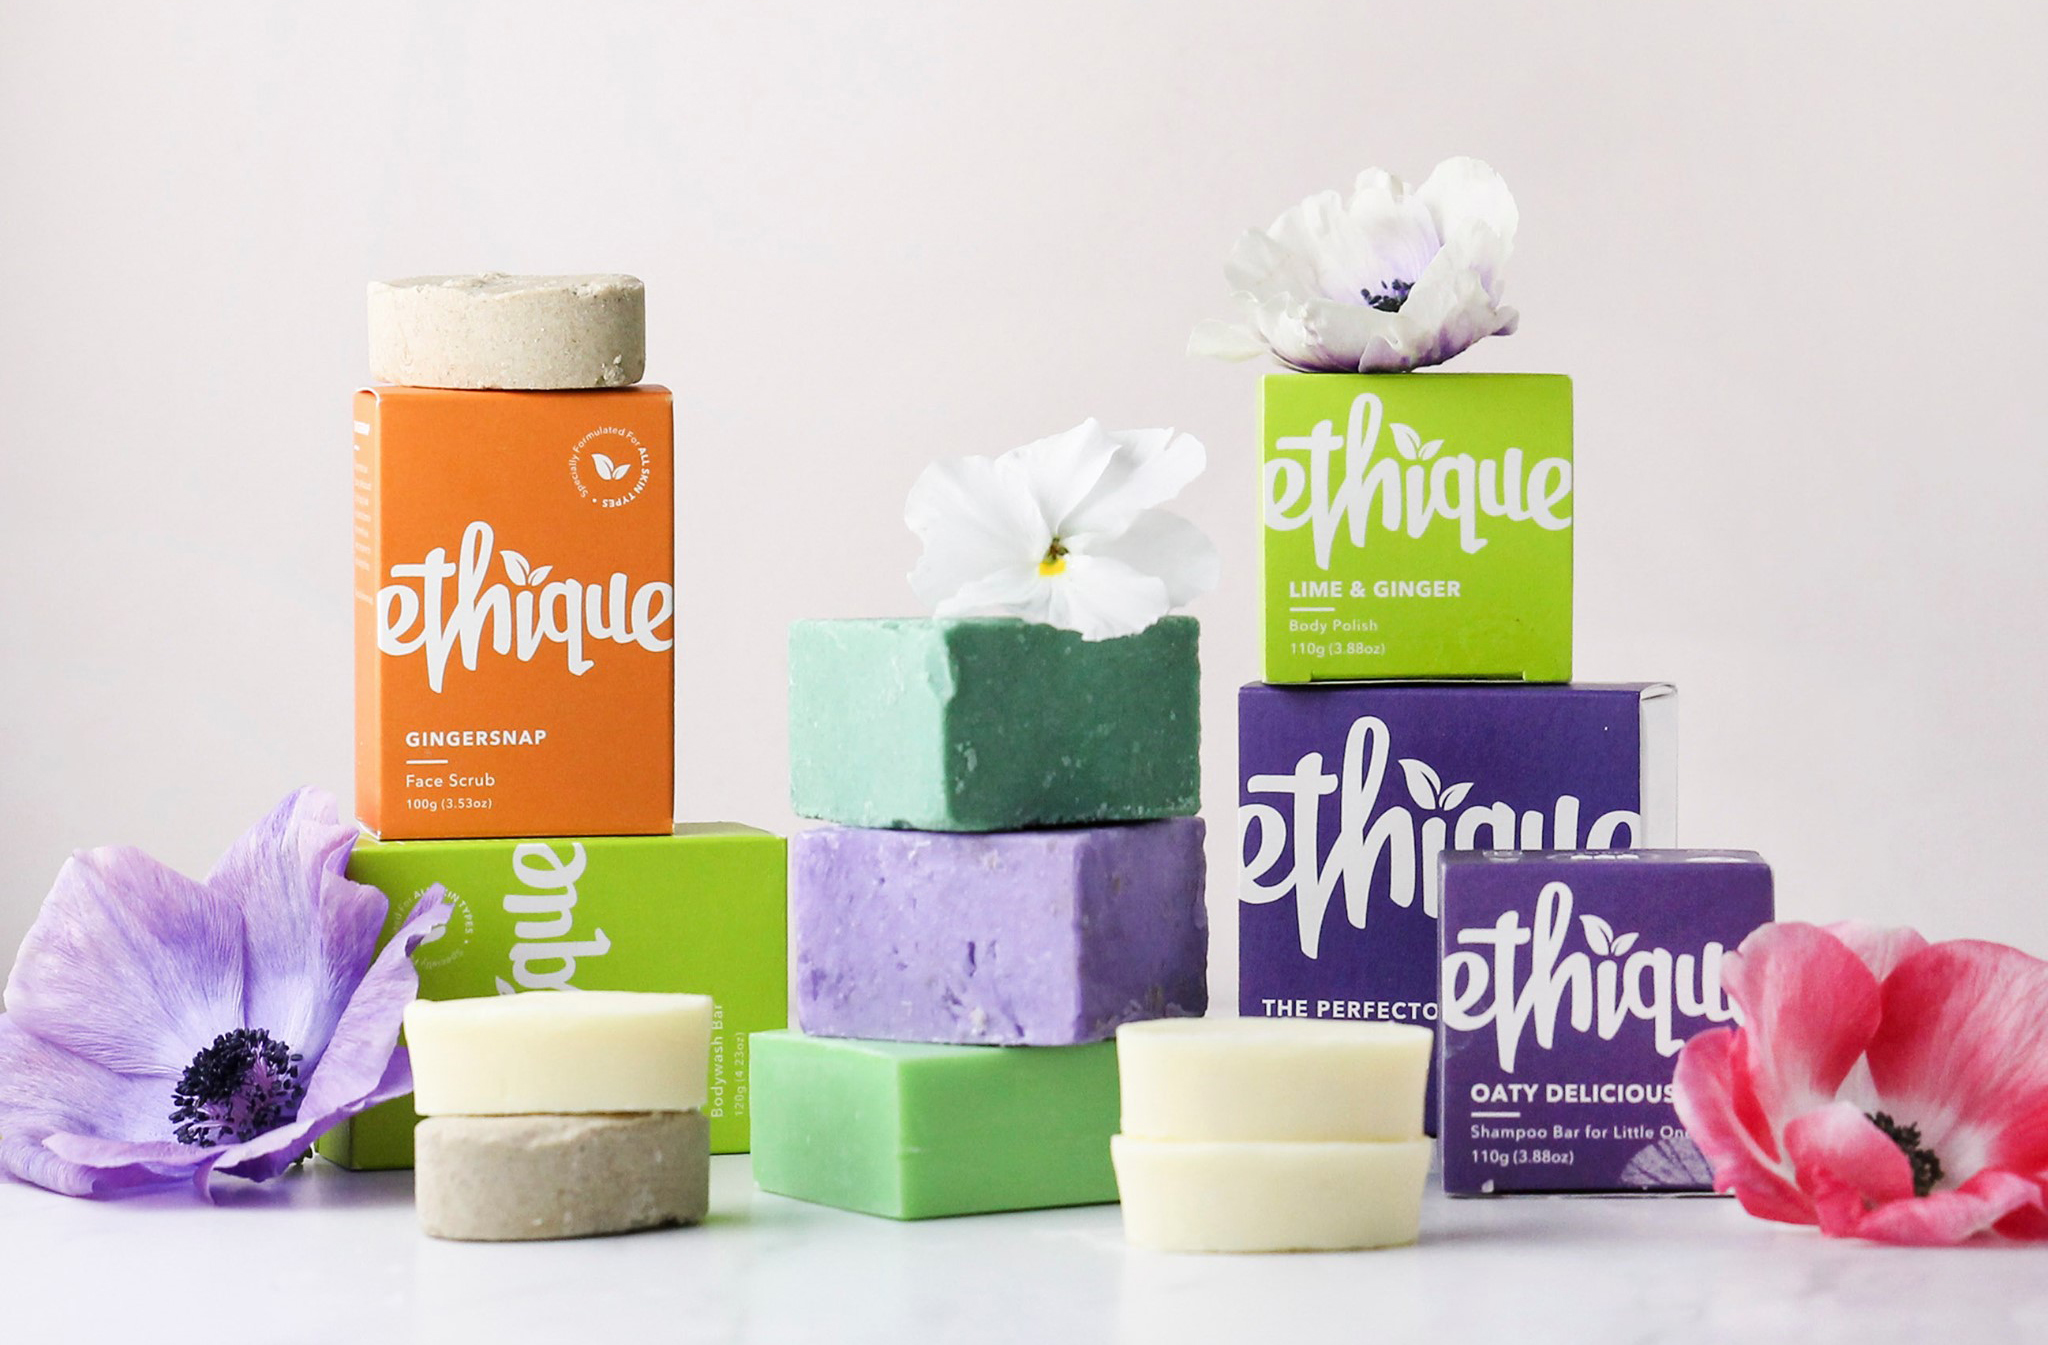 A collection of shampoo soap bars and brightly coloured boxes from Ethique